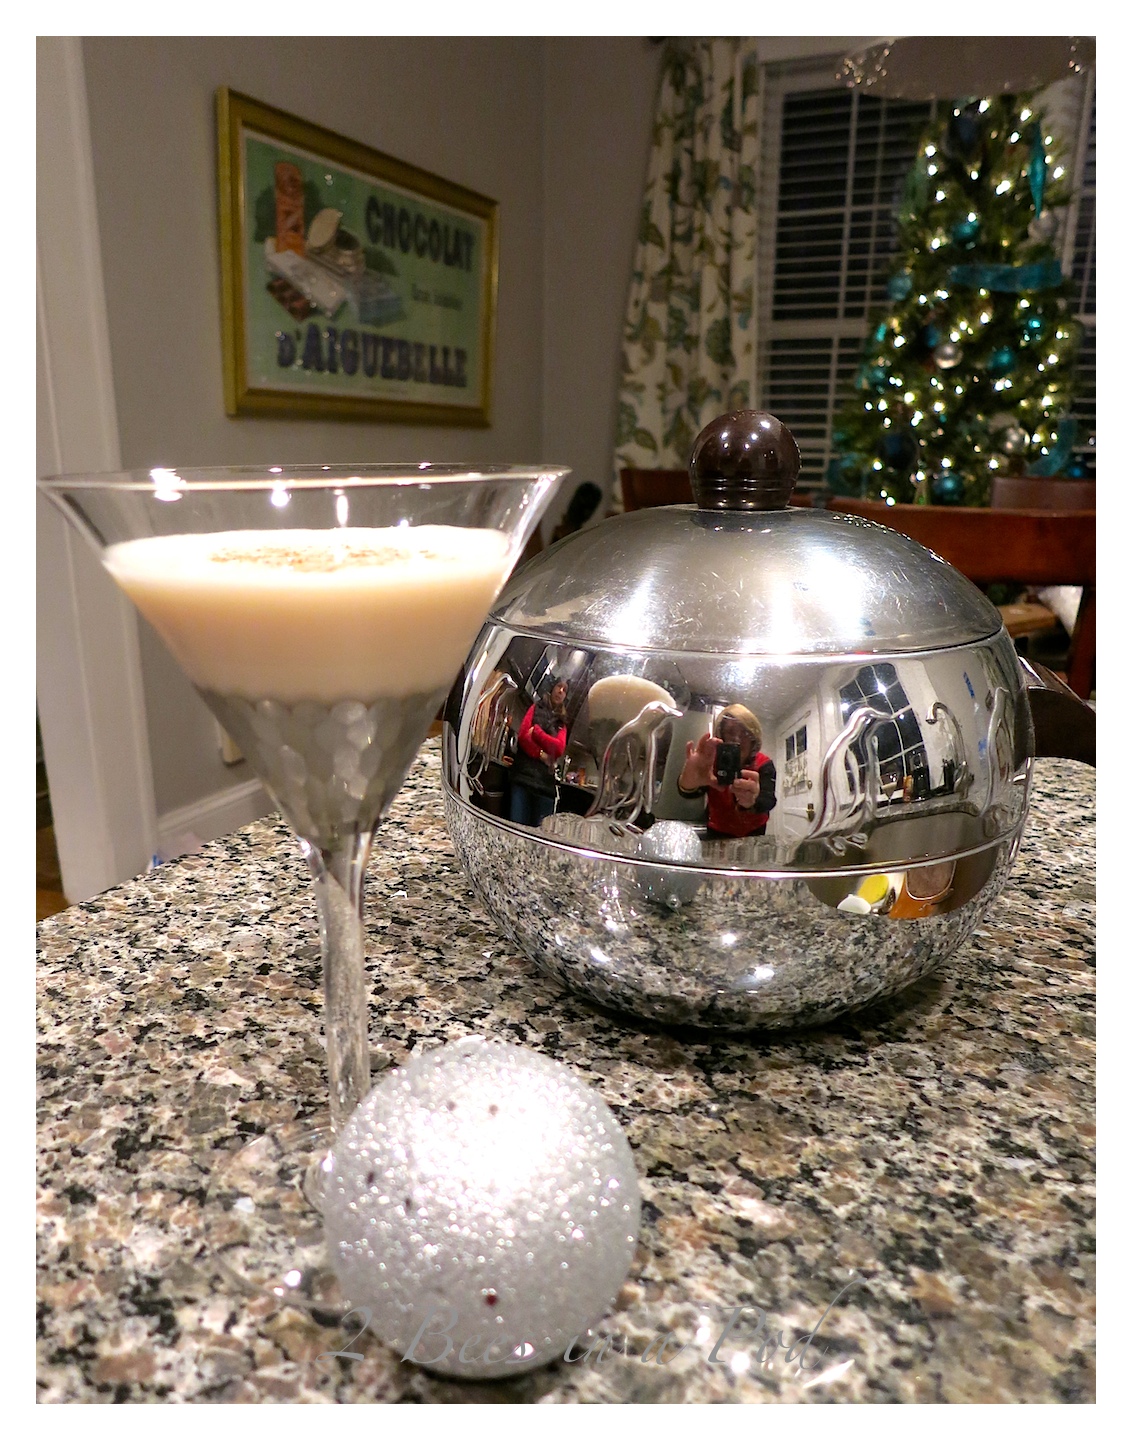 Let it Snowtini...perfect for the holidays!